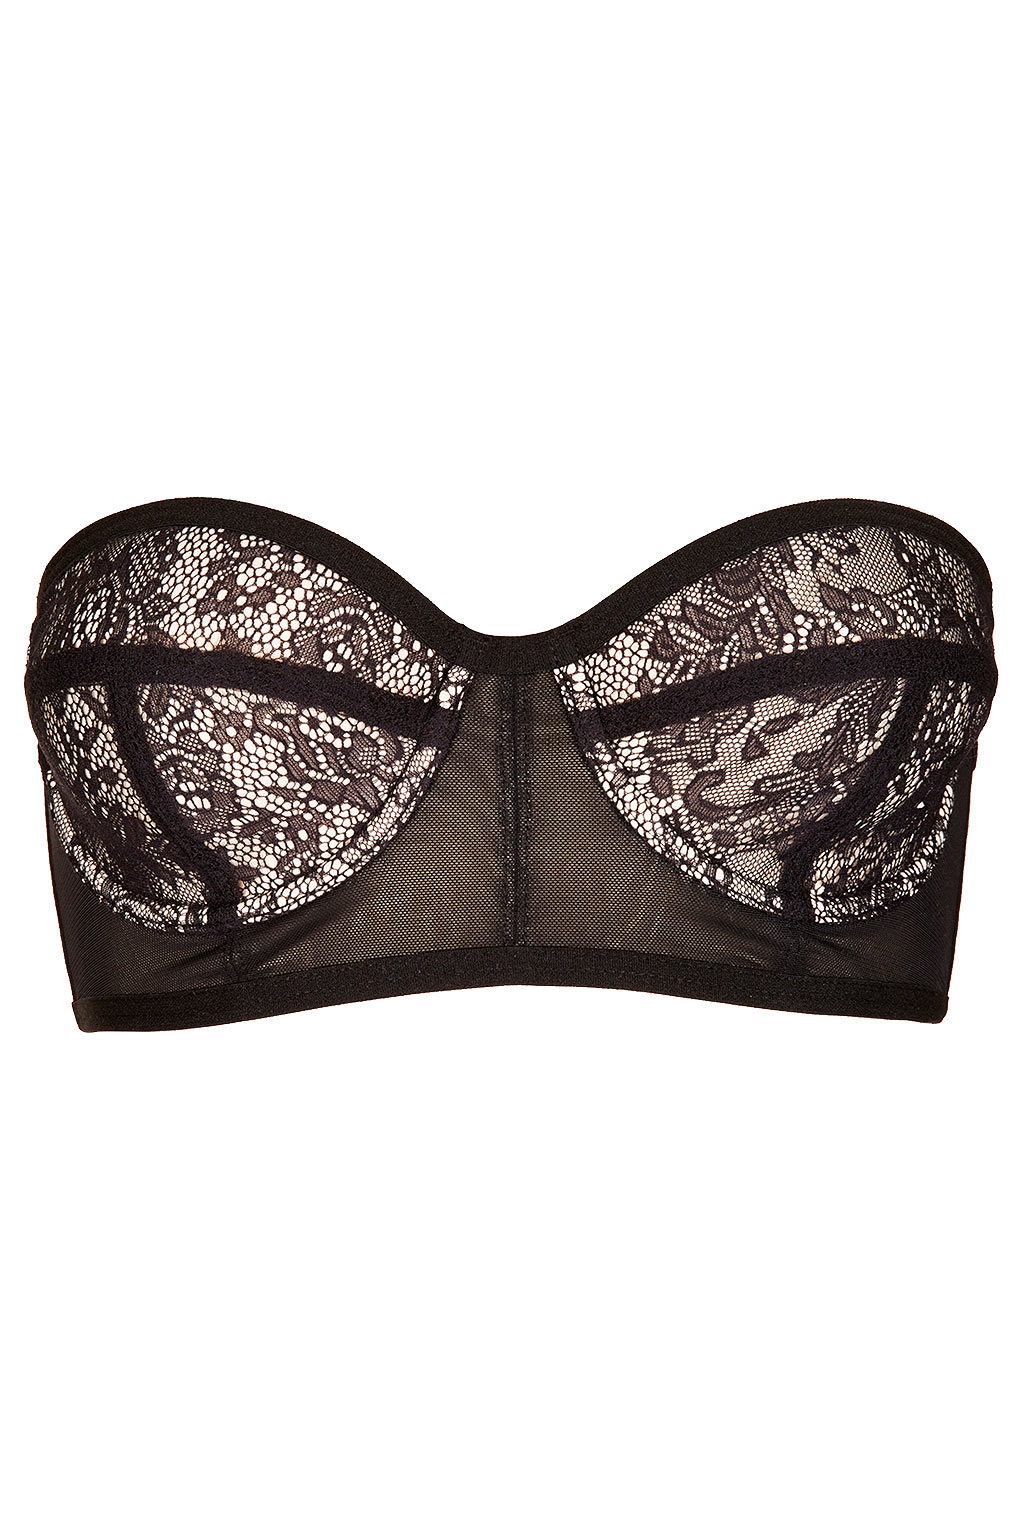 black lace strapless bra Cheaper Than Retail Price> Buy Clothing ...